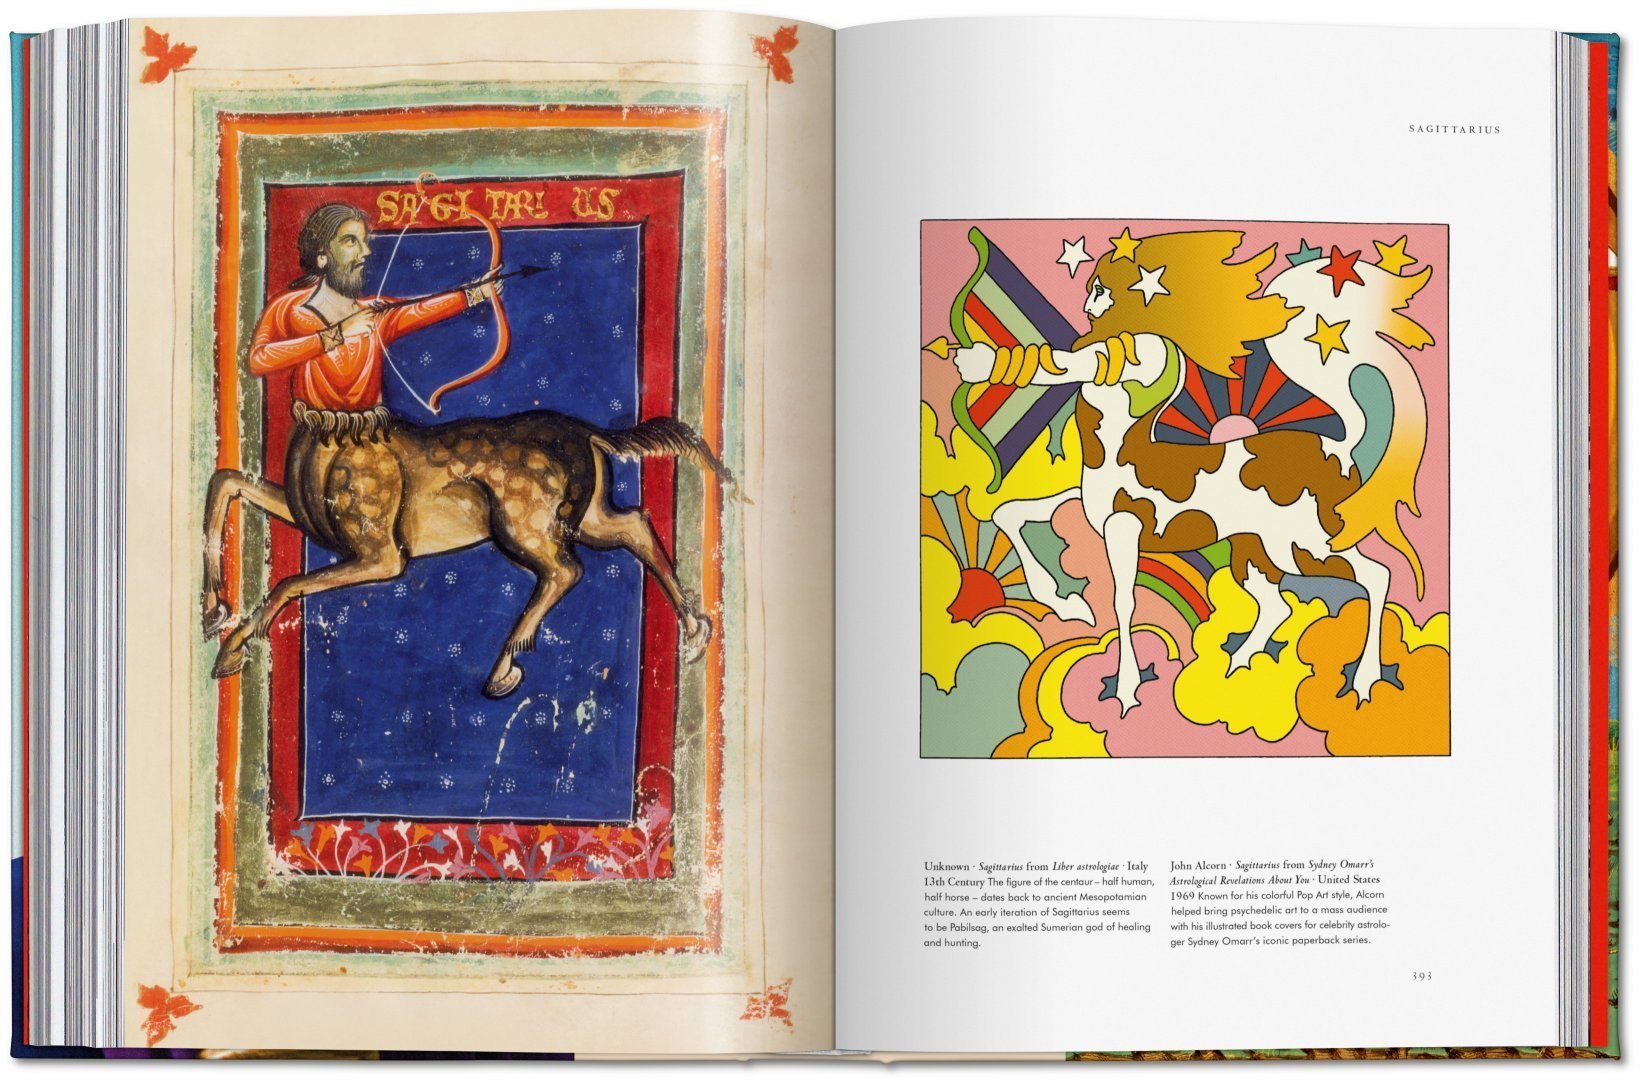 Éditions TASCHEN: Tarot. The Library of Esoterica